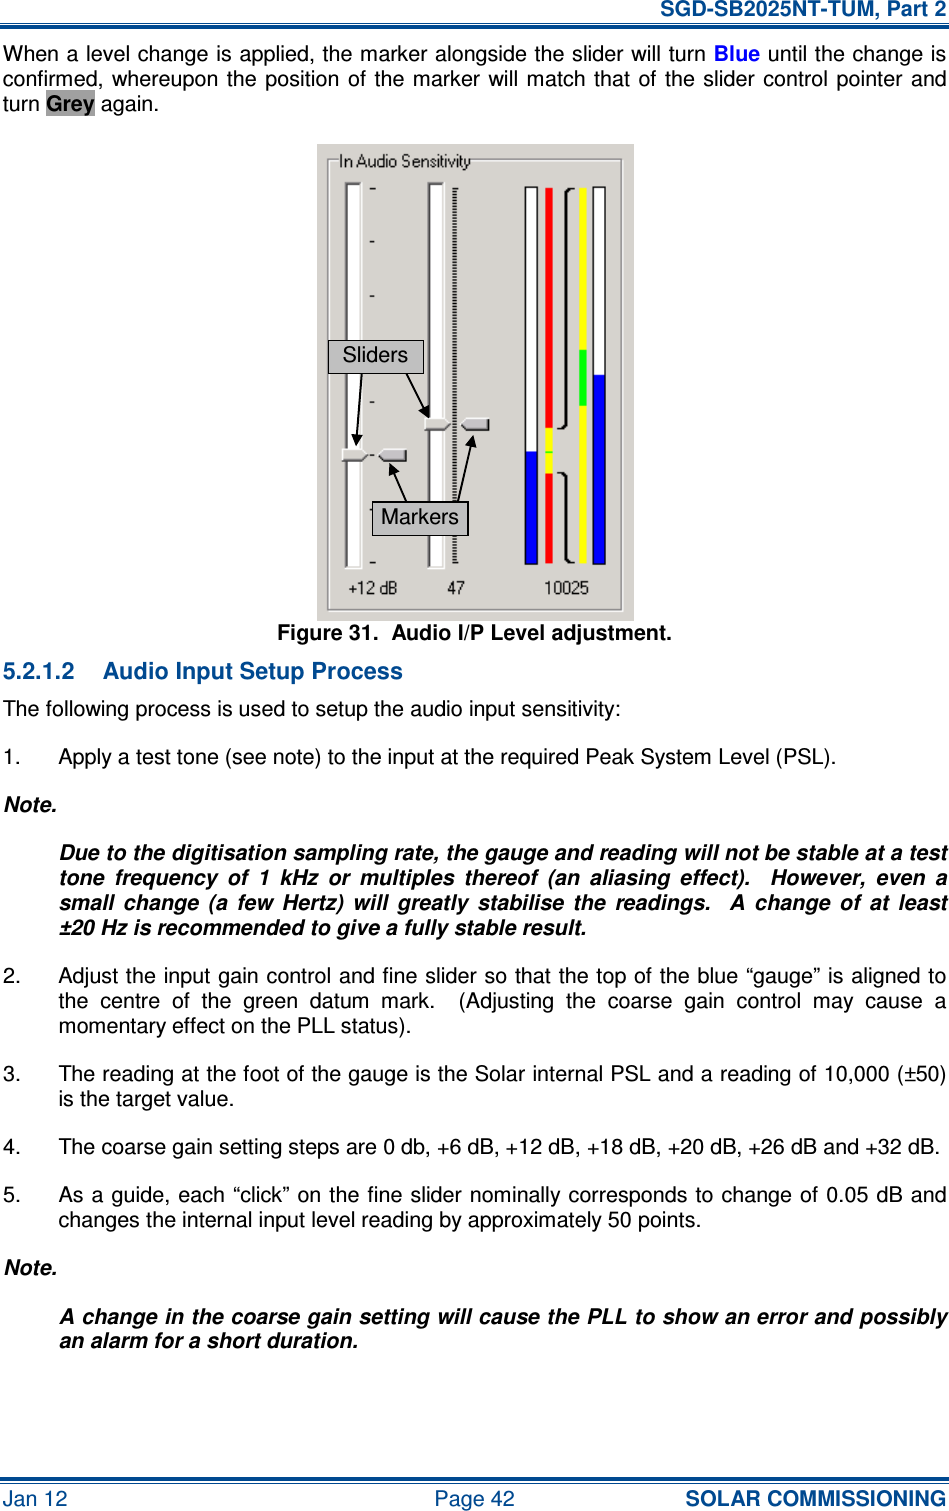   SGD-SB2025NT-TUM, Part 2 Jan 12  Page 42 SOLAR COMMISSIONING When a level change is applied, the marker alongside the slider will turn Blue until the change is confirmed, whereupon the  position of the marker will match  that  of  the slider  control  pointer and turn Grey again. Figure 31.  Audio I/P Level adjustment. 5.2.1.2  Audio Input Setup Process The following process is used to setup the audio input sensitivity: 1.  Apply a test tone (see note) to the input at the required Peak System Level (PSL). Note. Due to the digitisation sampling rate, the gauge and reading will not be stable at a test tone  frequency  of  1  kHz  or  multiples  thereof  (an  aliasing  effect).    However,  even  a small  change  (a  few  Hertz)  will  greatly  stabilise  the  readings.    A  change  of  at  least ±20 Hz is recommended to give a fully stable result. 2.  Adjust the input gain control and fine slider so that the top of the blue “gauge” is aligned to the  centre  of  the  green  datum  mark.    (Adjusting  the  coarse  gain  control  may  cause  a momentary effect on the PLL status). 3.  The reading at the foot of the gauge is the Solar internal PSL and a reading of 10,000 (±50) is the target value. 4.  The coarse gain setting steps are 0 db, +6 dB, +12 dB, +18 dB, +20 dB, +26 dB and +32 dB. 5.  As a guide, each “click” on the fine slider nominally corresponds to change of 0.05 dB and changes the internal input level reading by approximately 50 points. Note. A change in the coarse gain setting will cause the PLL to show an error and possibly an alarm for a short duration. Sliders Markers 